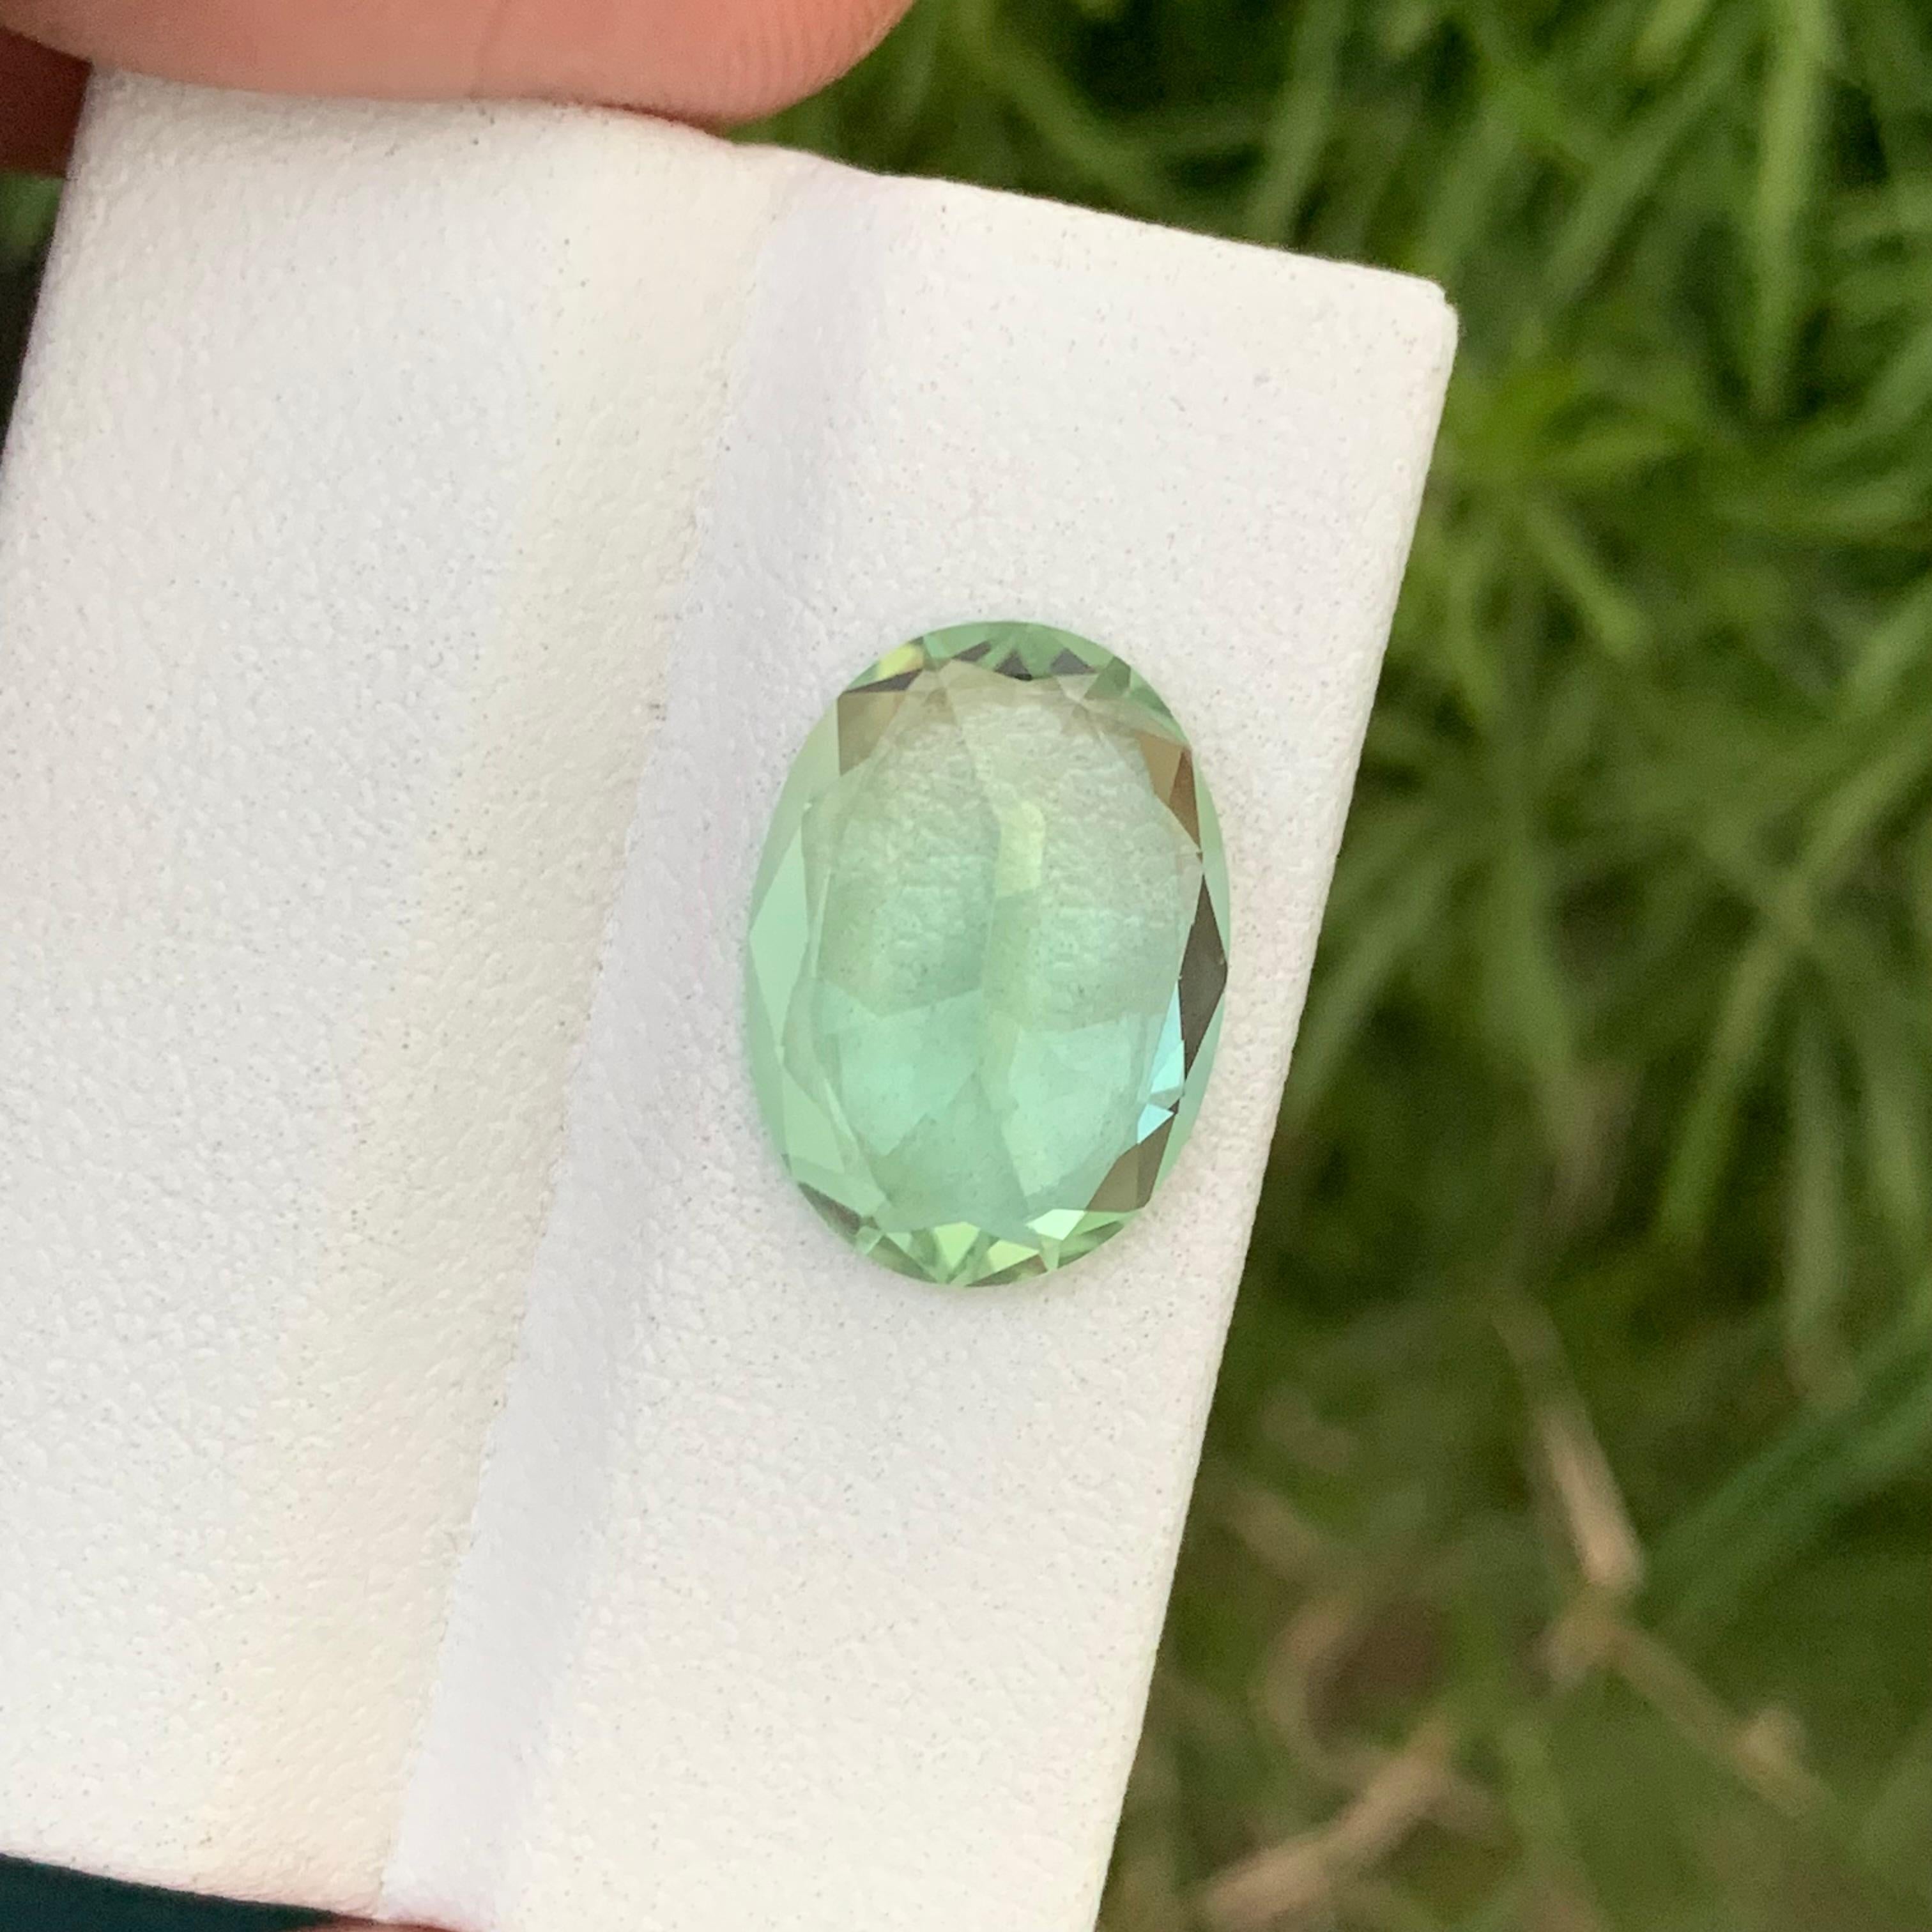 Loose Tourmaline 
Weight: 7.20 Carats 
Dimension: 15.3x11x6.9 Mm
Origin: Kunar Afghanistan 
Shape: Oval
Treatment: Non
Color; Mint Green
Certificate; On Customer Demand
Mint Green Tourmaline, a stunning variety within the Tourmaline family, exhibits